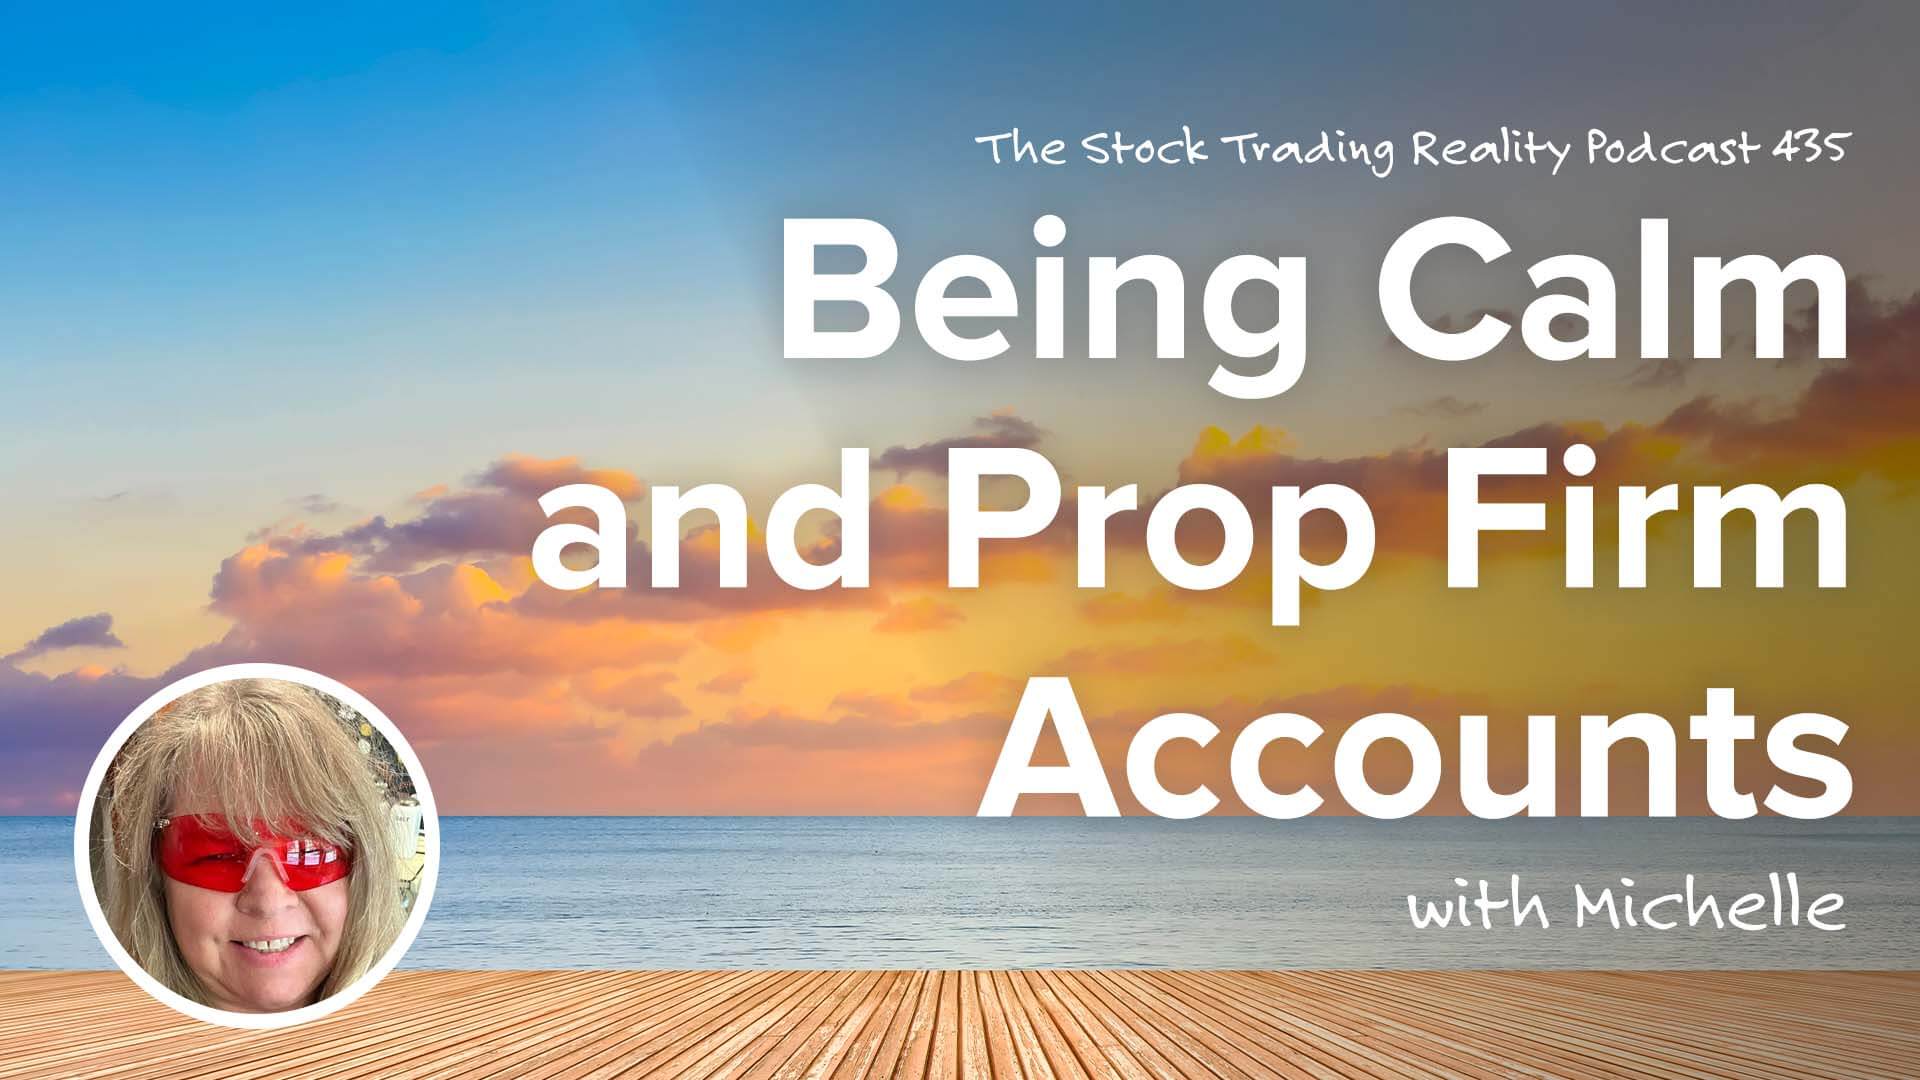 Being Calm and Prop Firm Accounts | STR 435